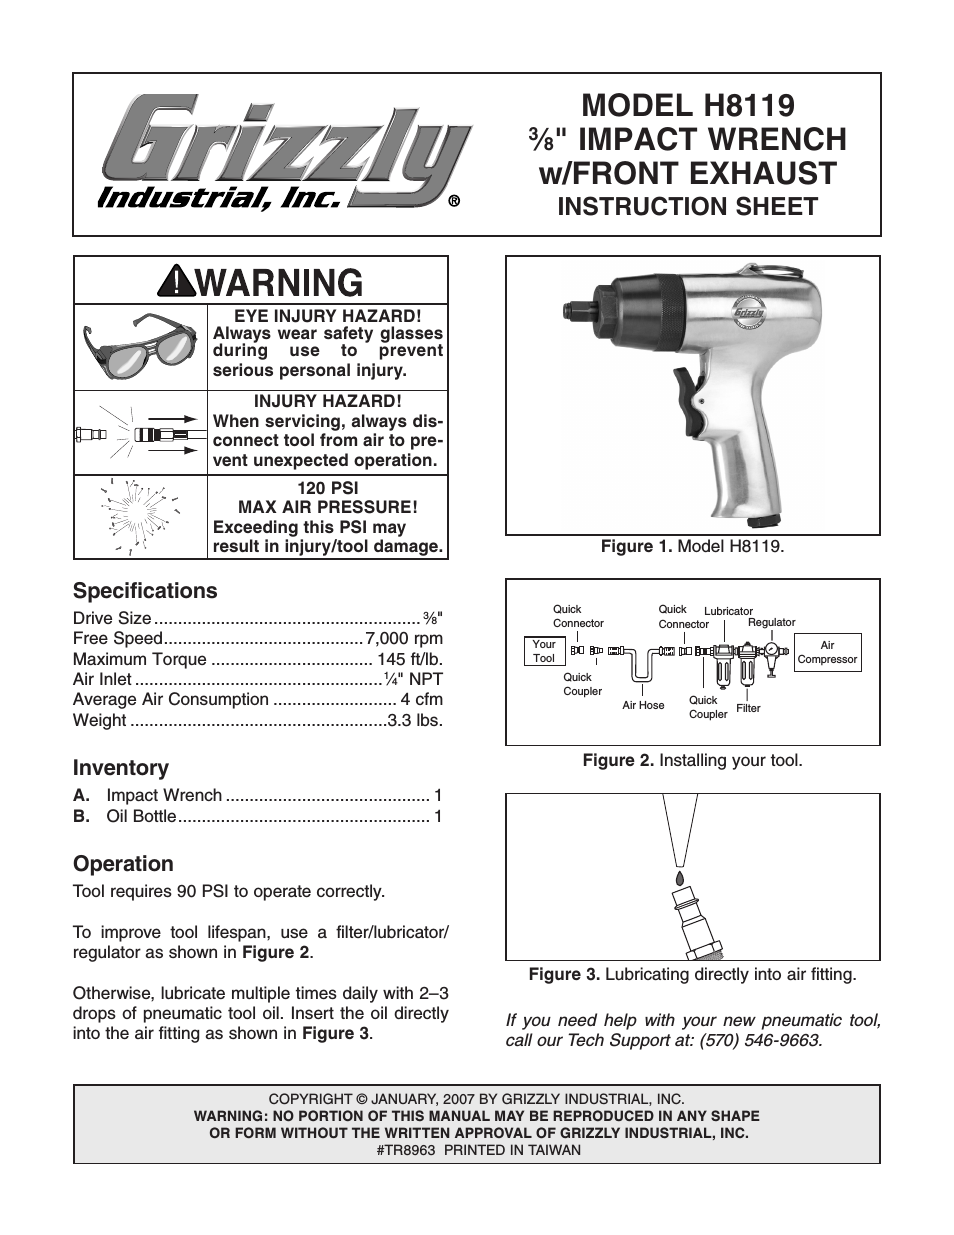 3/8" Impact Wrench w/ Front Exhaust H8119